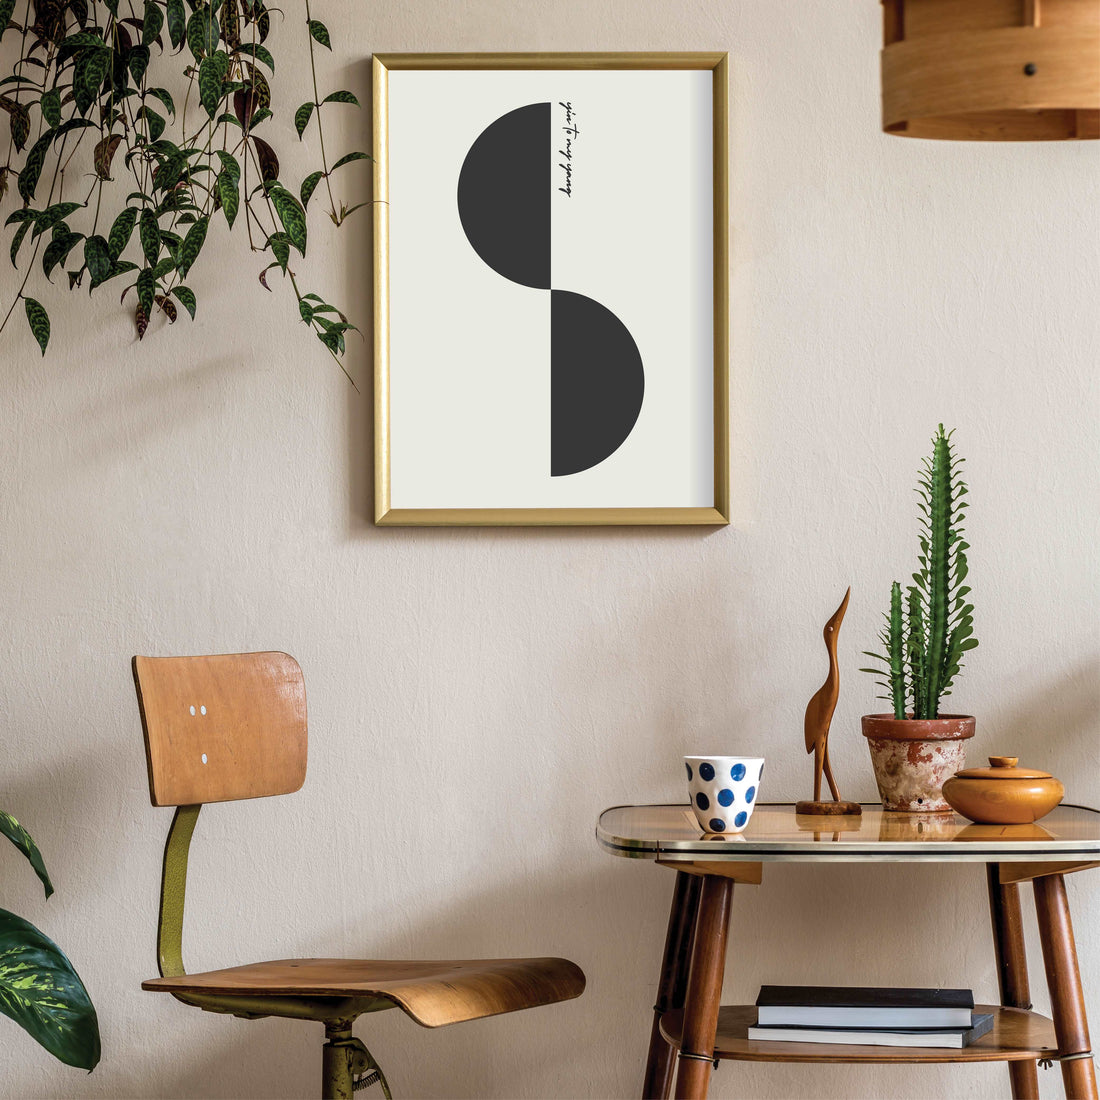 Poster Yin to My Yang - Add sophistication to your home